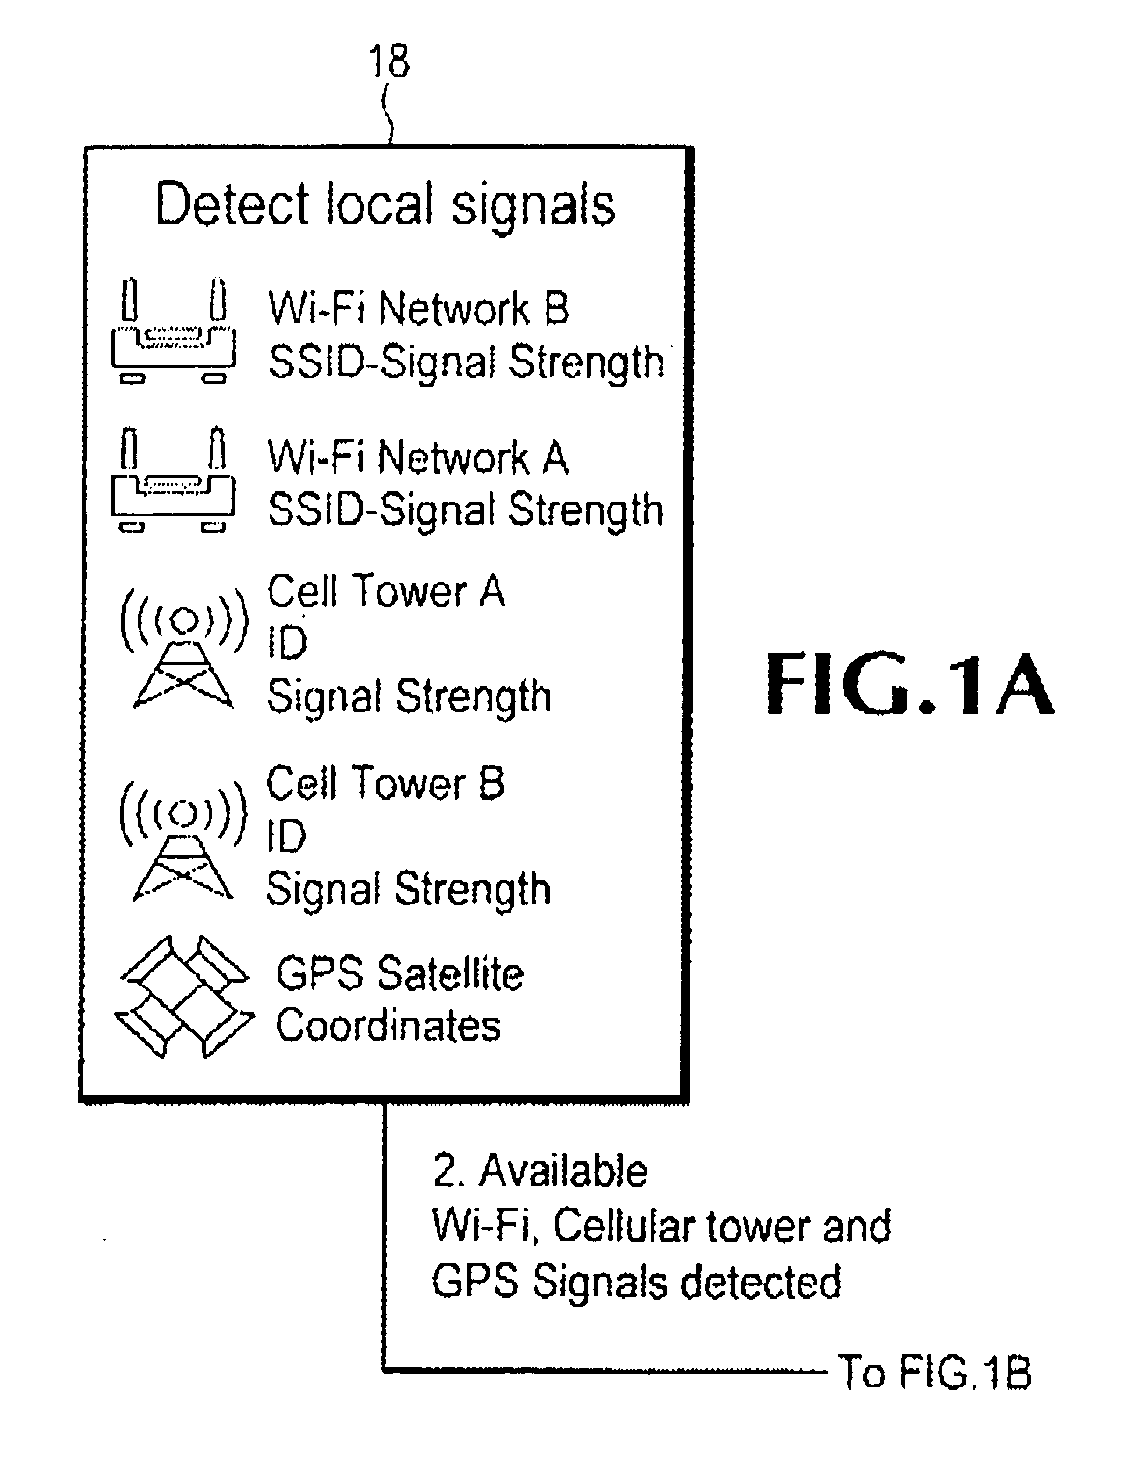 Mobile device or computer theft recovery system and method